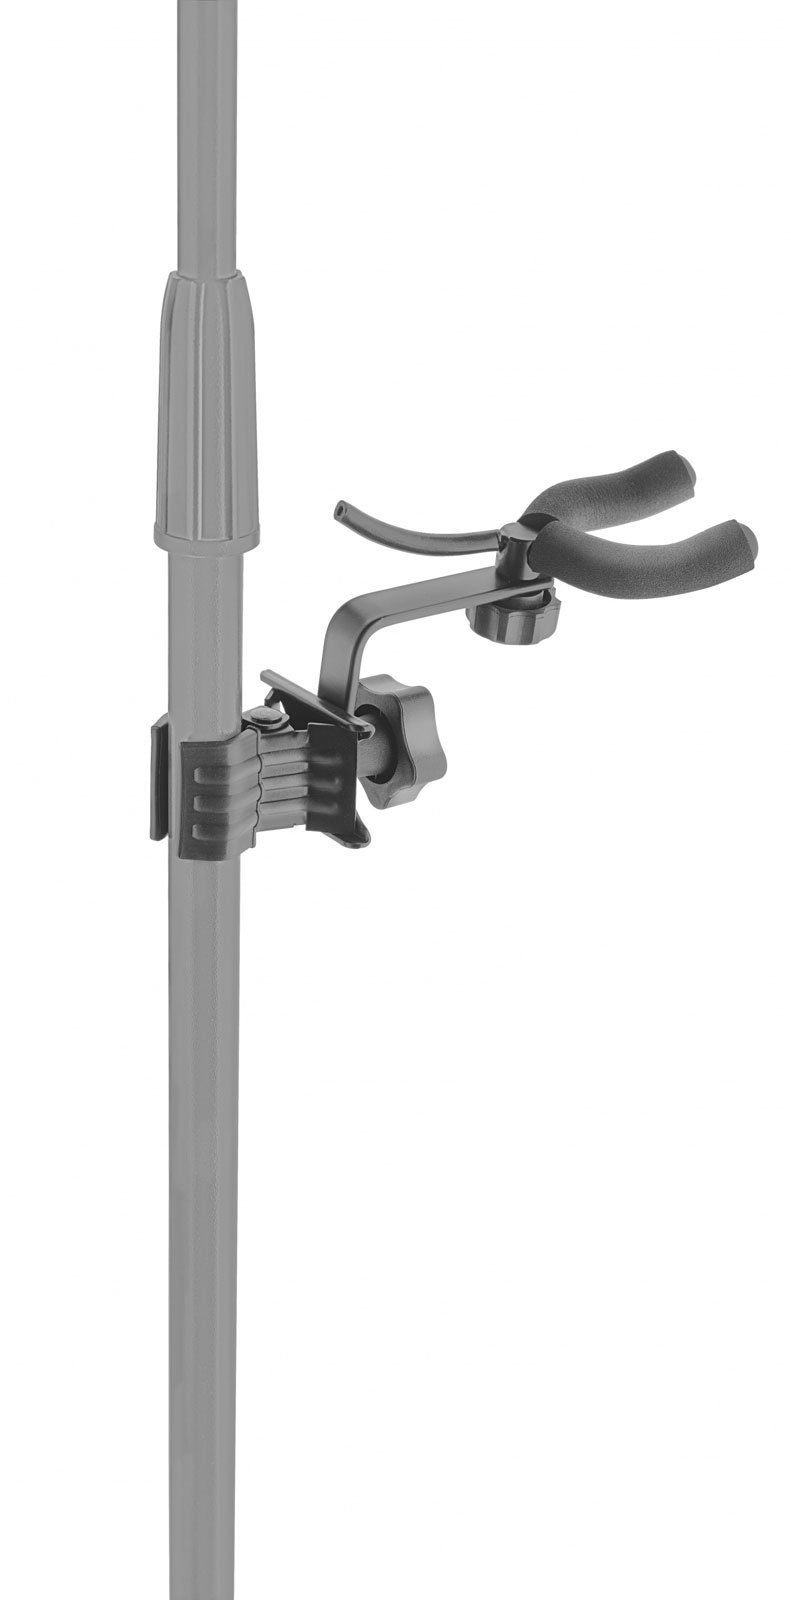 STAGG SCL-VH STAND WITH STAND CLAMP